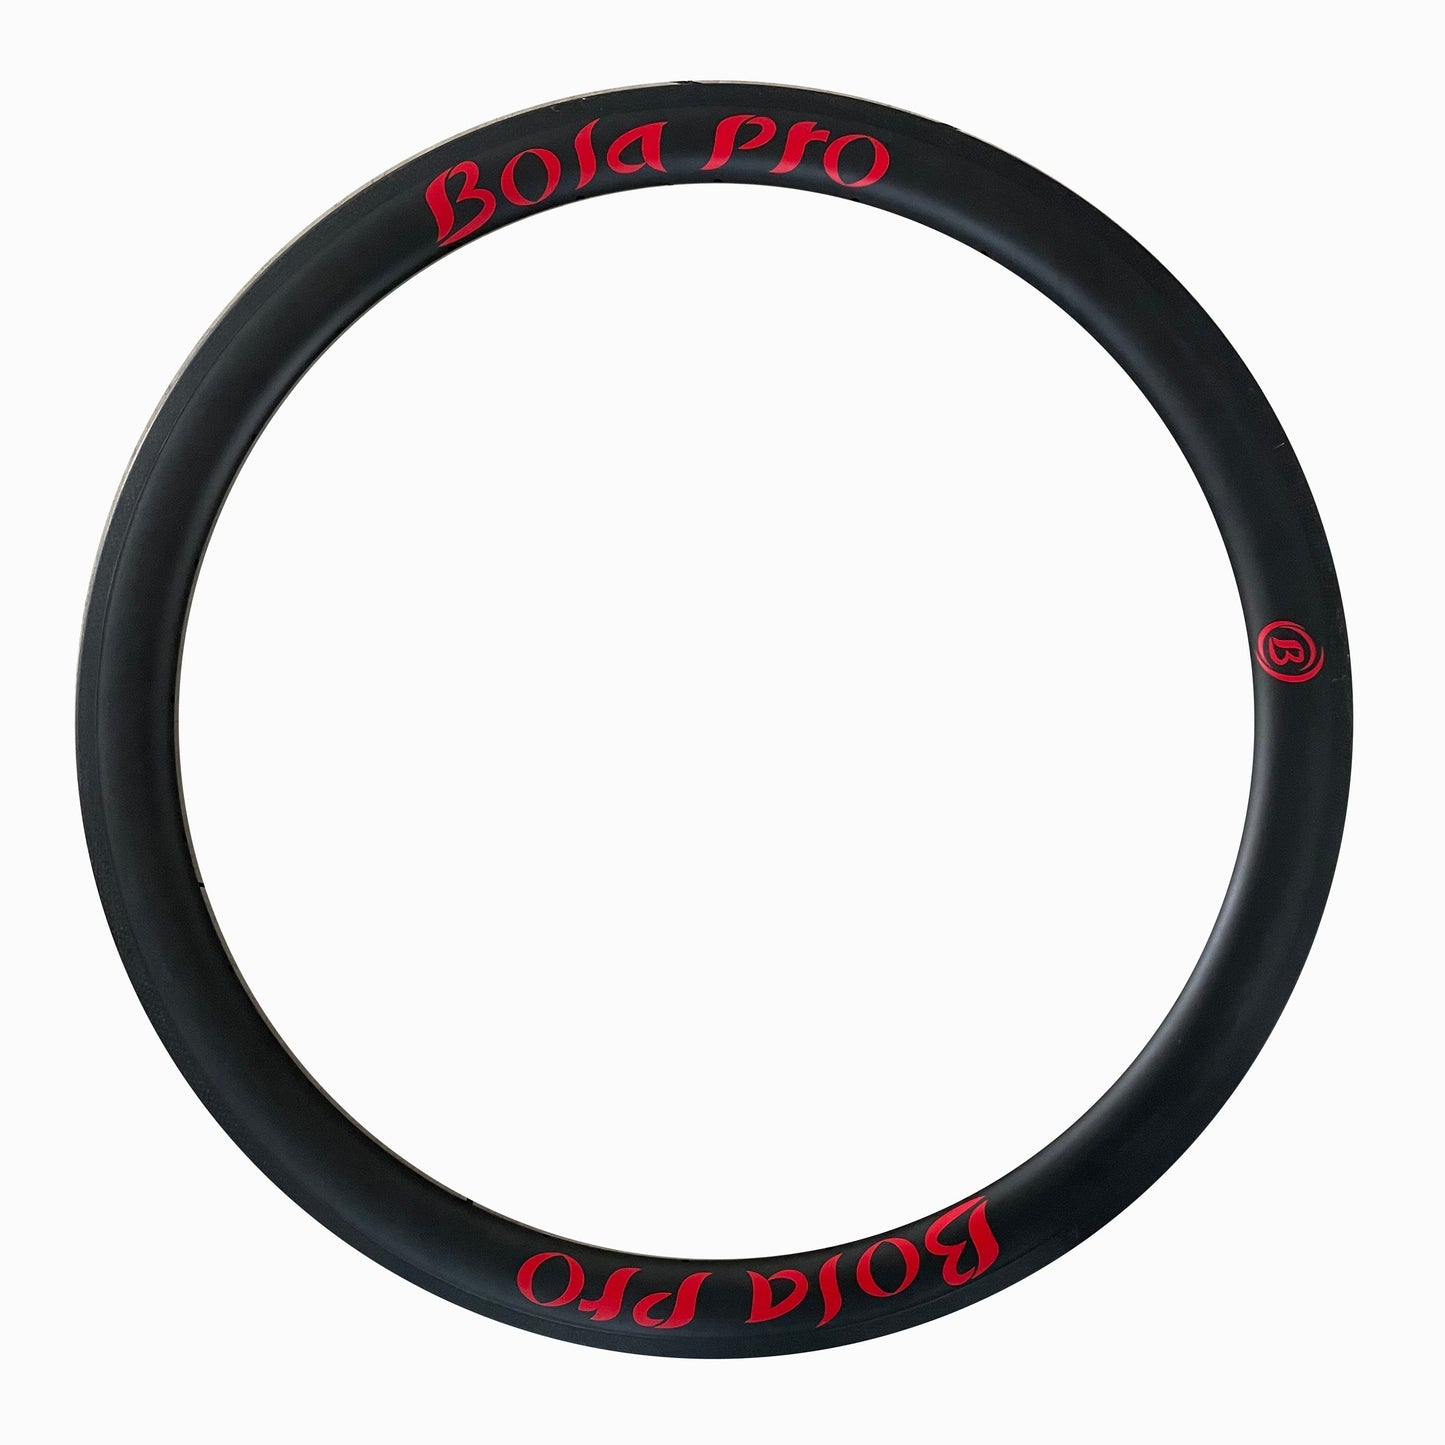 700c road bicicleta tubeless ready carbon cyclisme rims 50mm high profile 34mm outer wide 23mm inner wide,aerodynamic U shape wider upgrade,basalt,engrave,disc brake optional